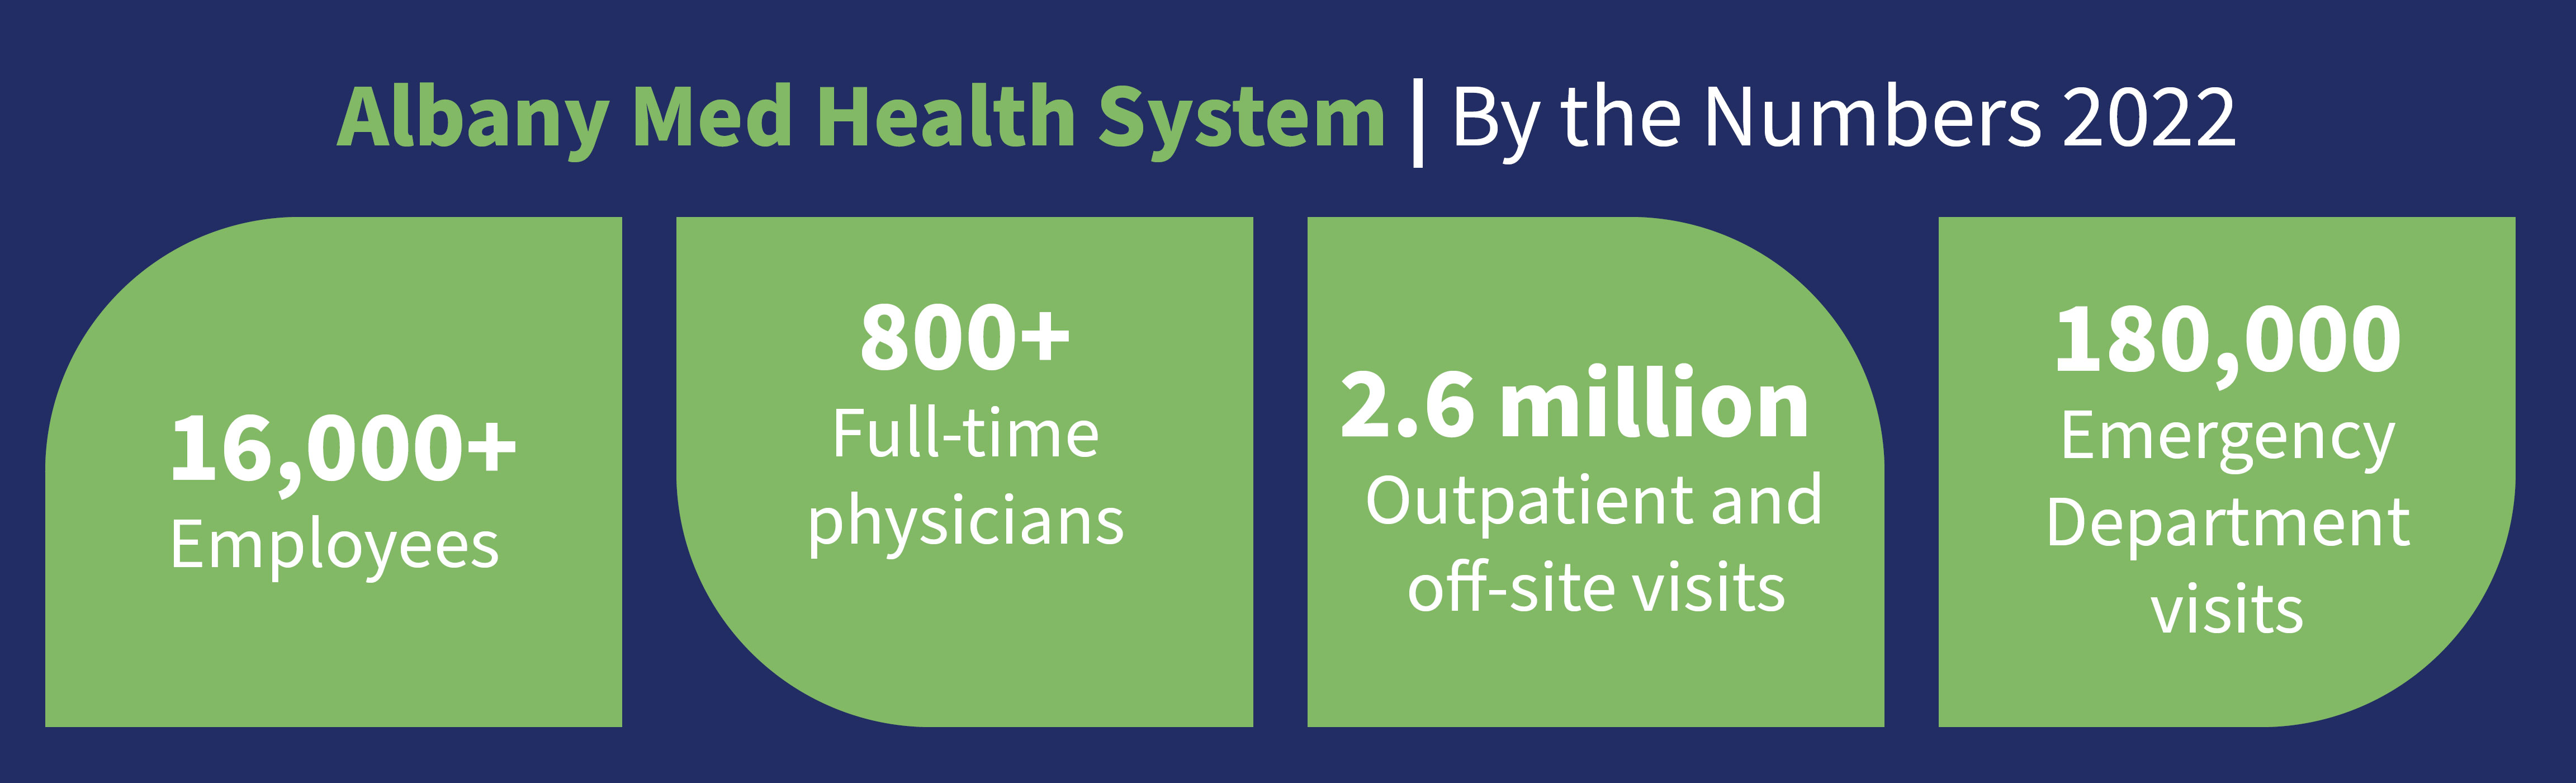 Albany Med Health System | By the Numbers